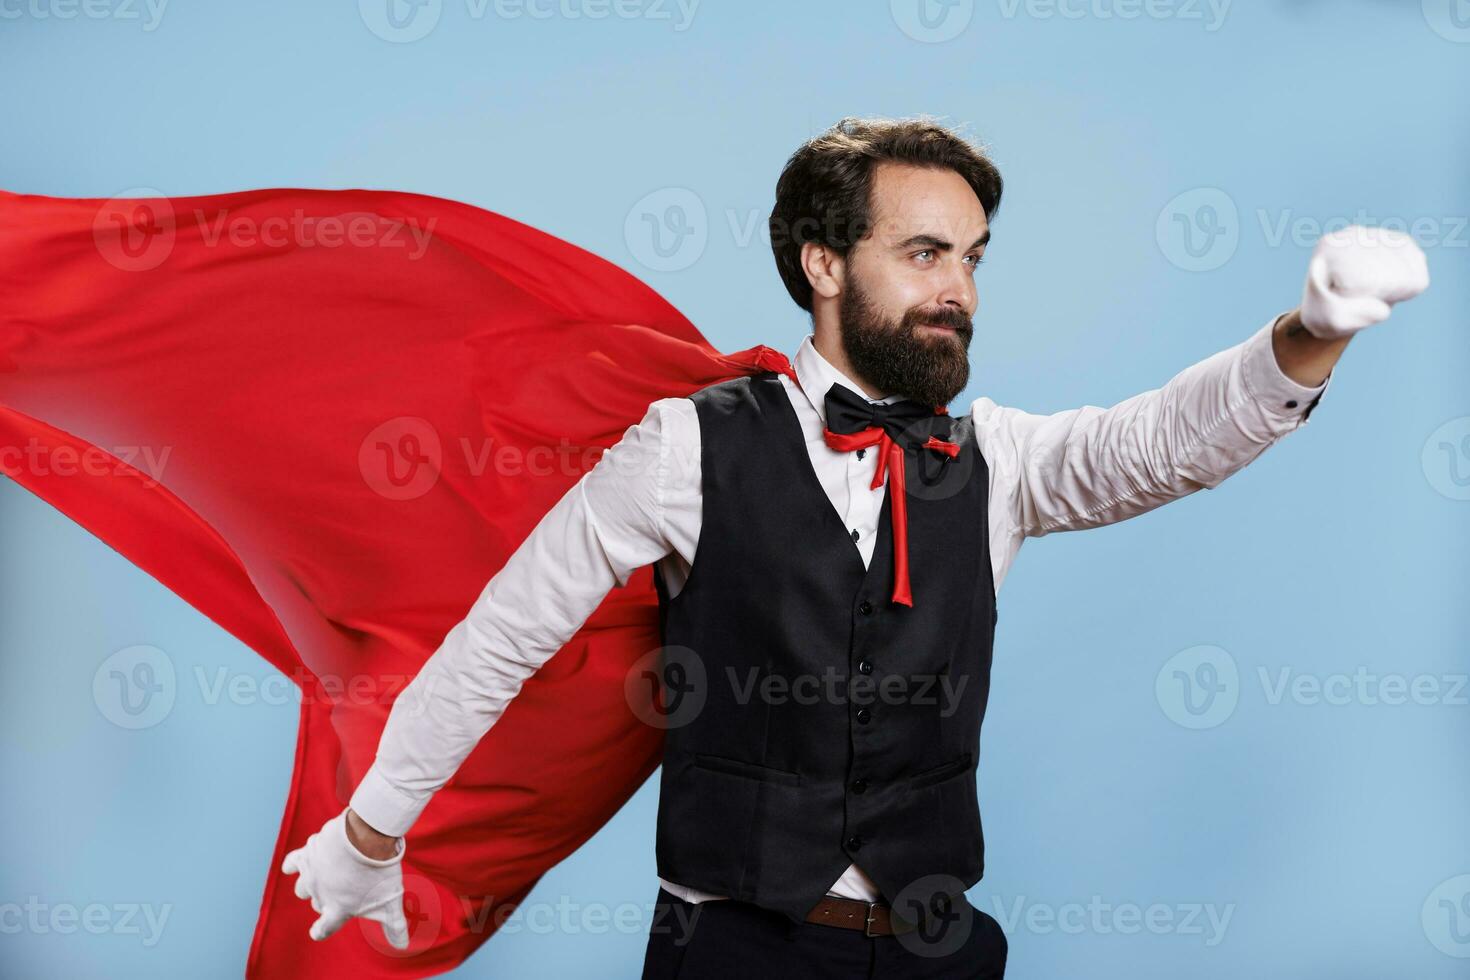 Determined adult posing as superhero while he wears red mantle against blue background in studio, professional person acting like a superhuman. Man with formal attire and cartoon cape. photo